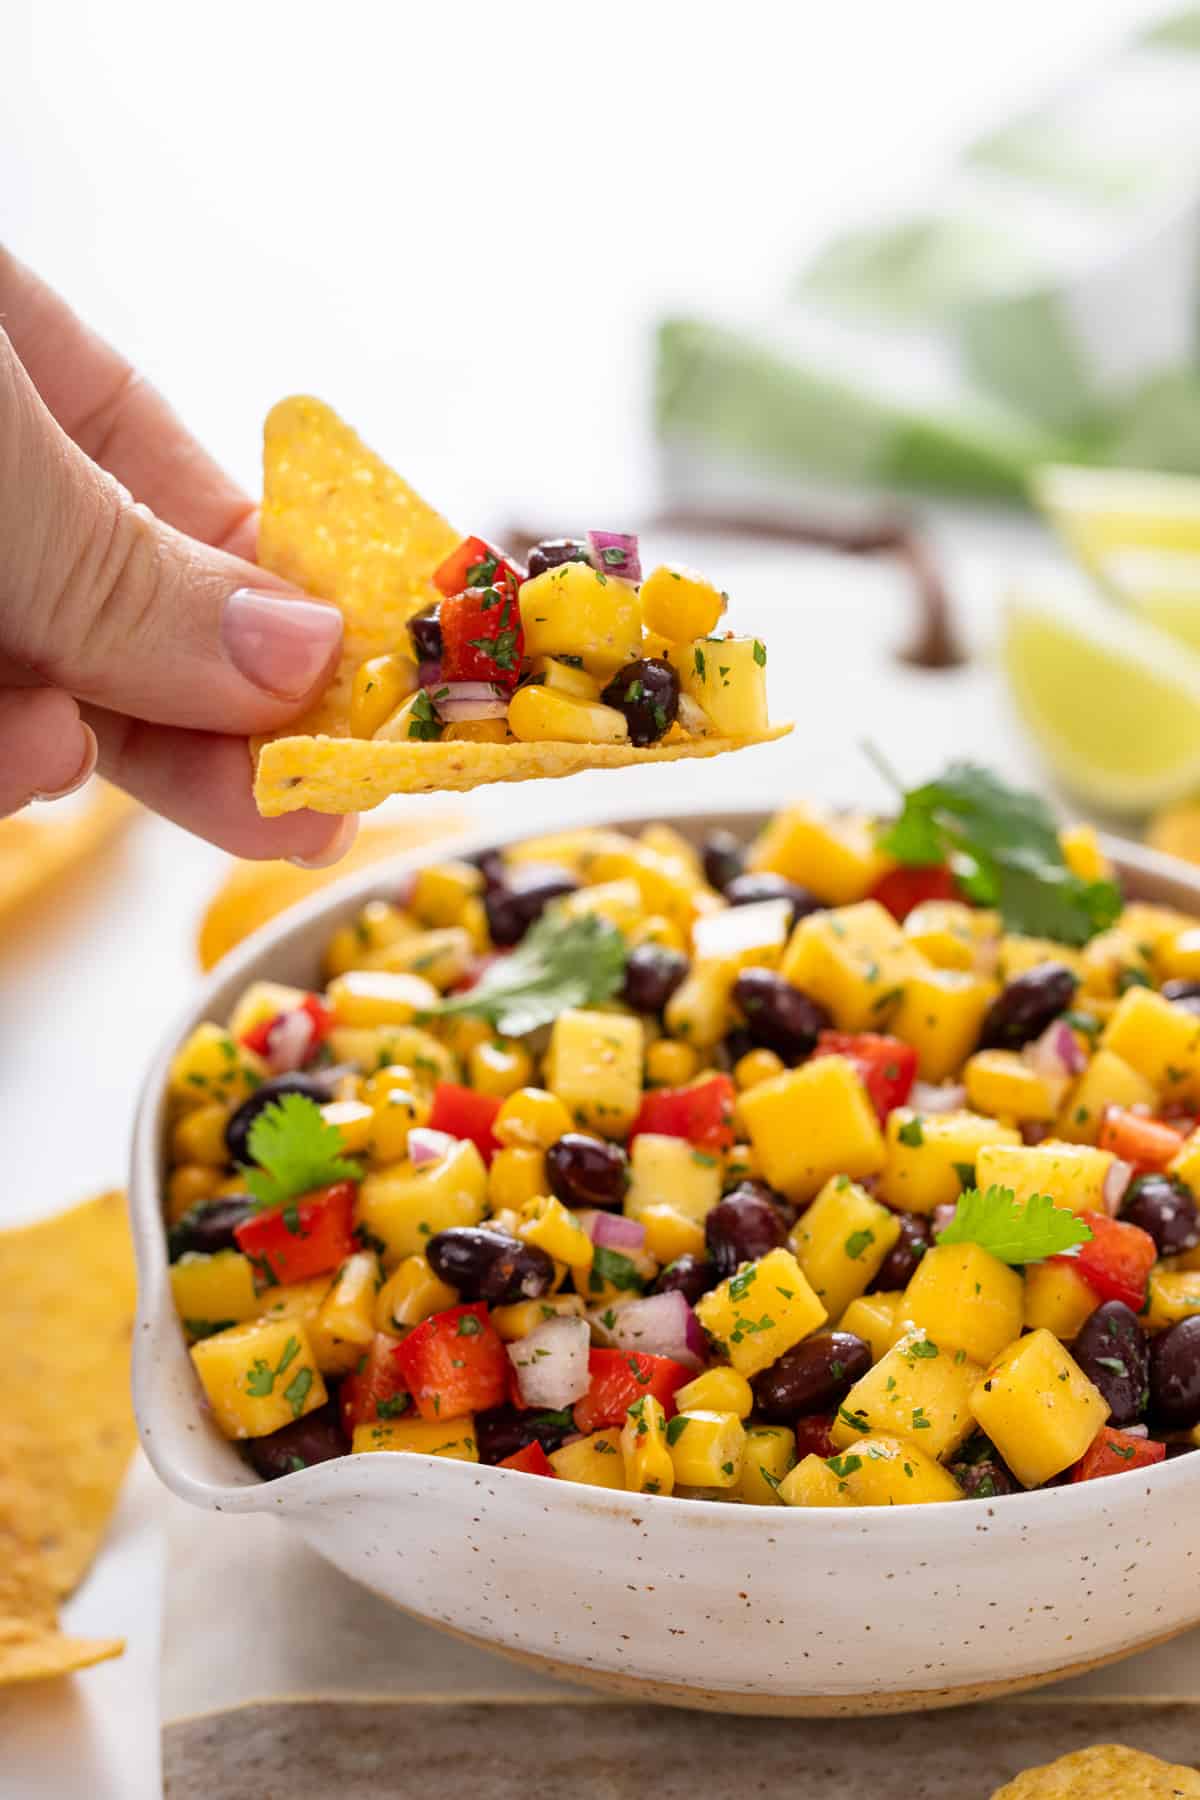 Hand using a tortilla chip to scoop up mango and black bean salsa from a bowl.